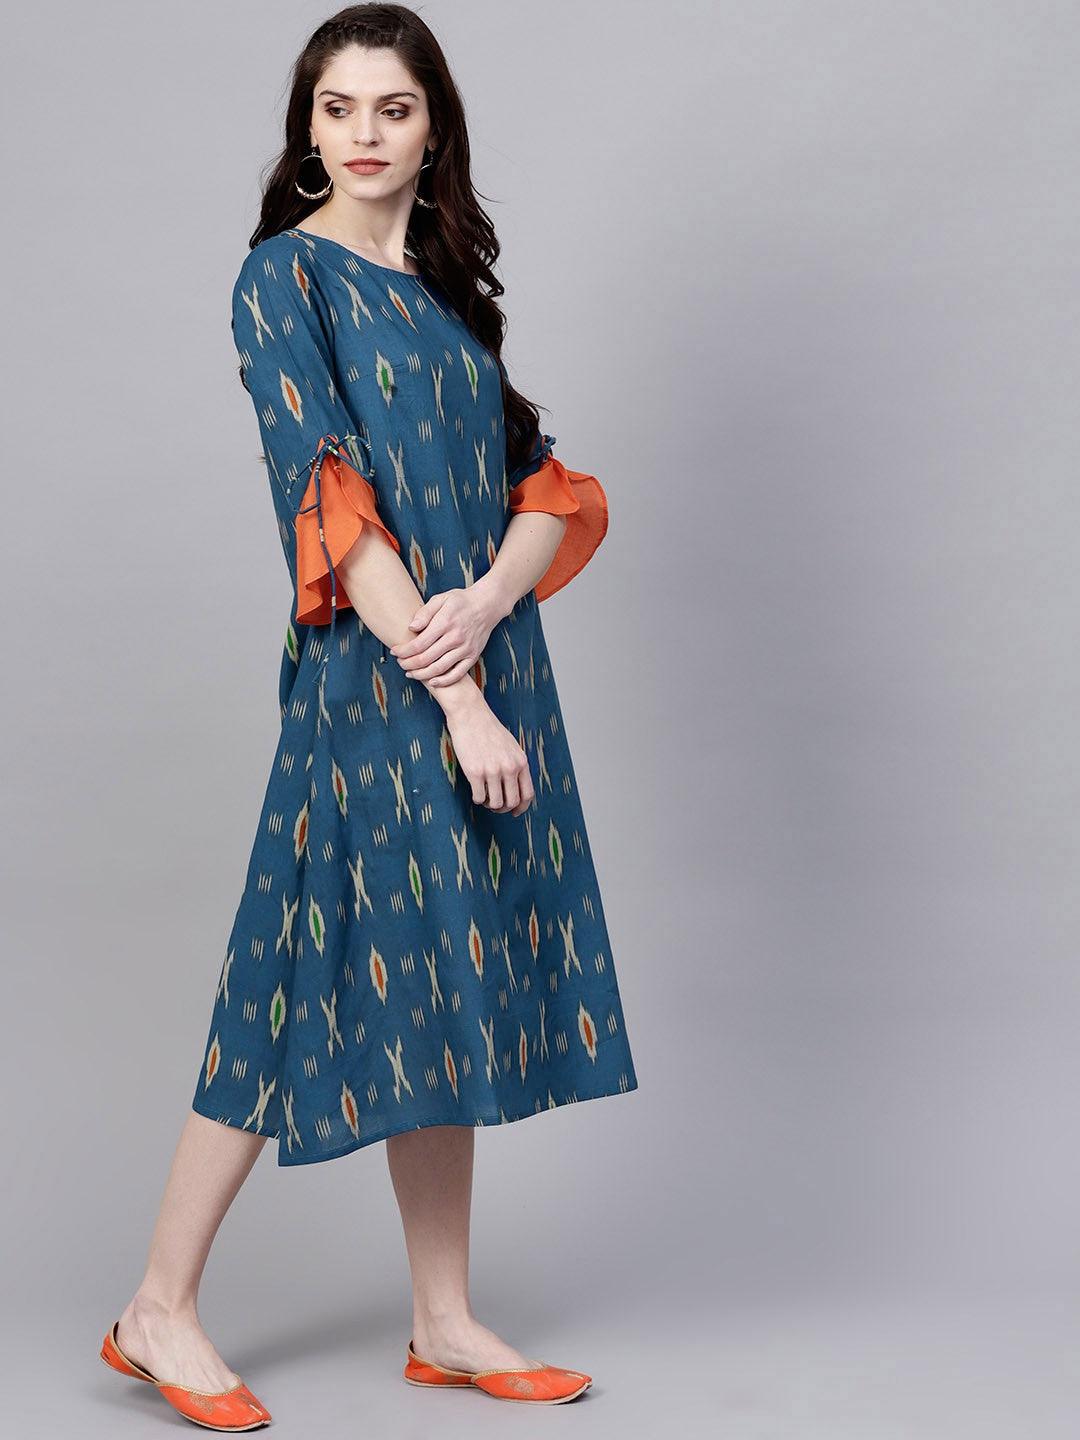 Blue Ikat Print A-Line Dress With Ruffle Sleeve (Fully Stitched) - Znxclothing